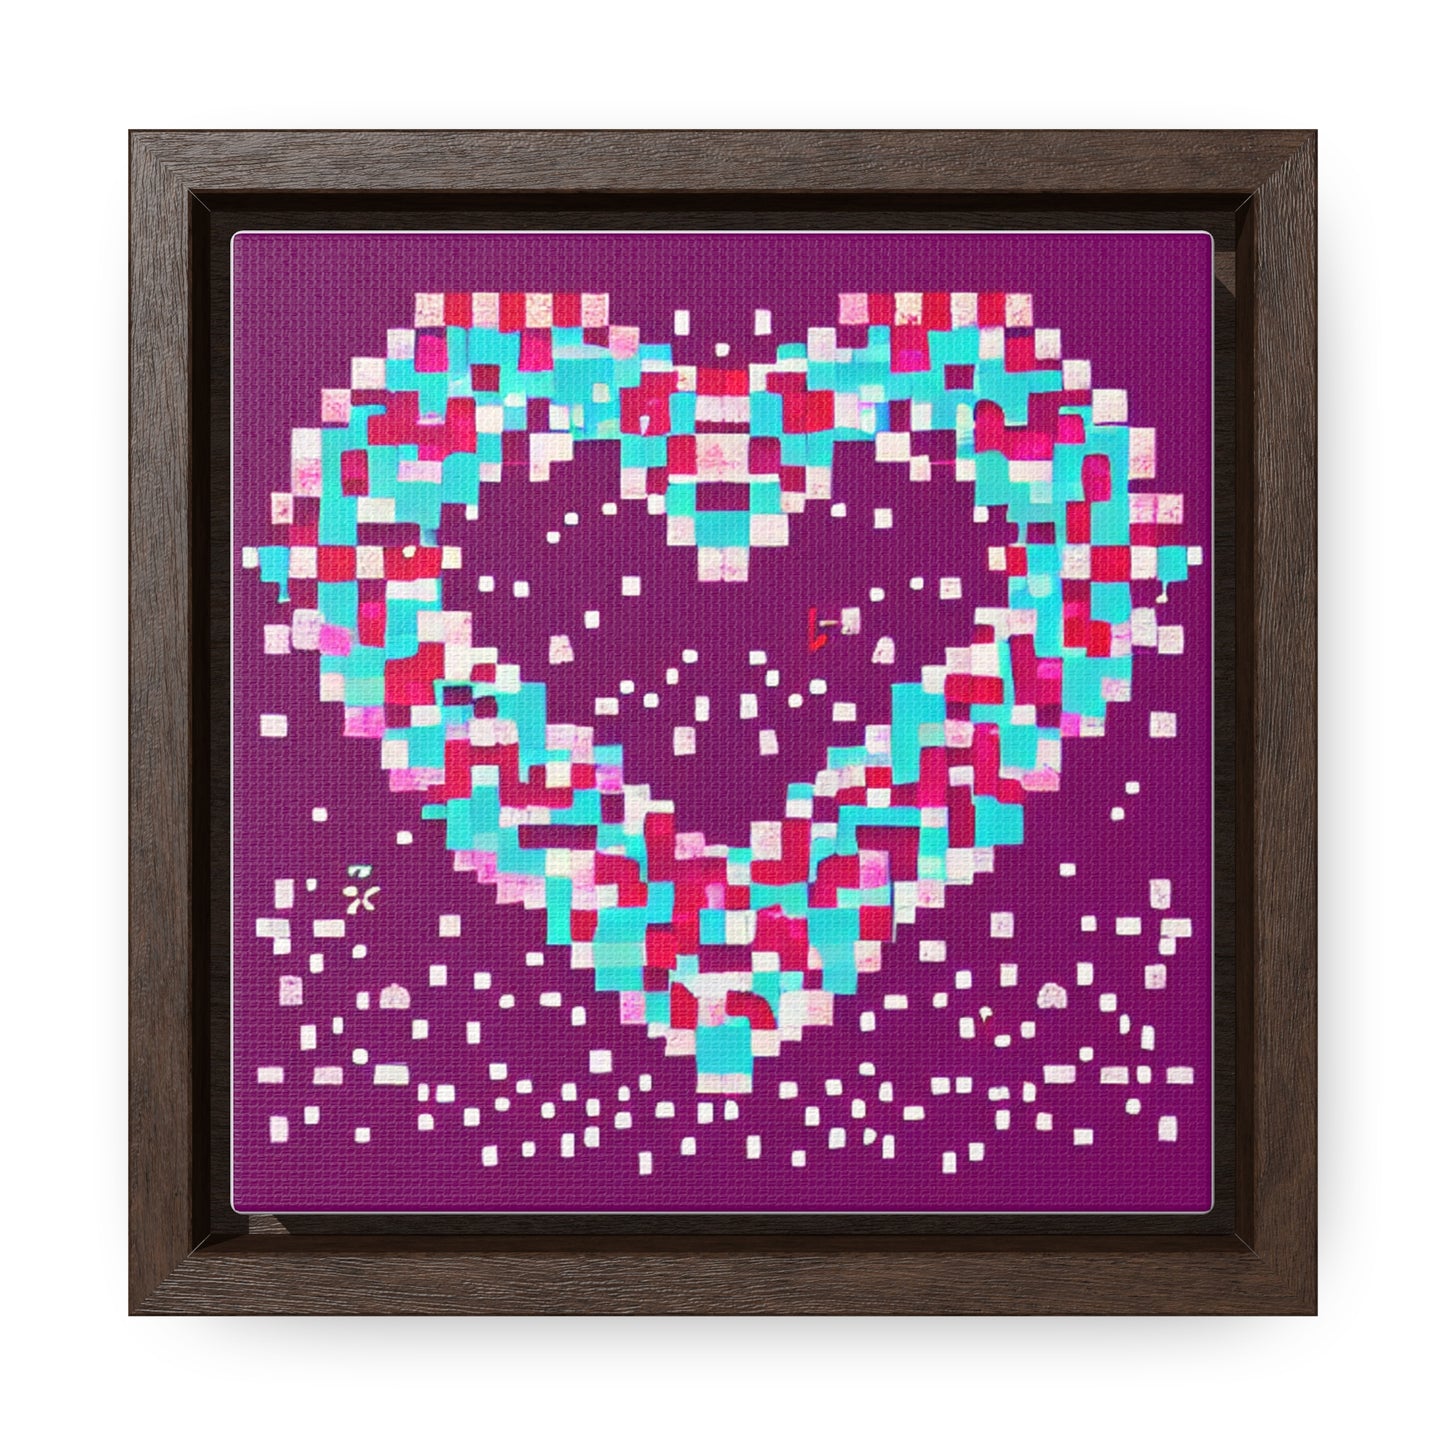 A Colorful Heart on Gallery Canvas Wraps, Square Frame